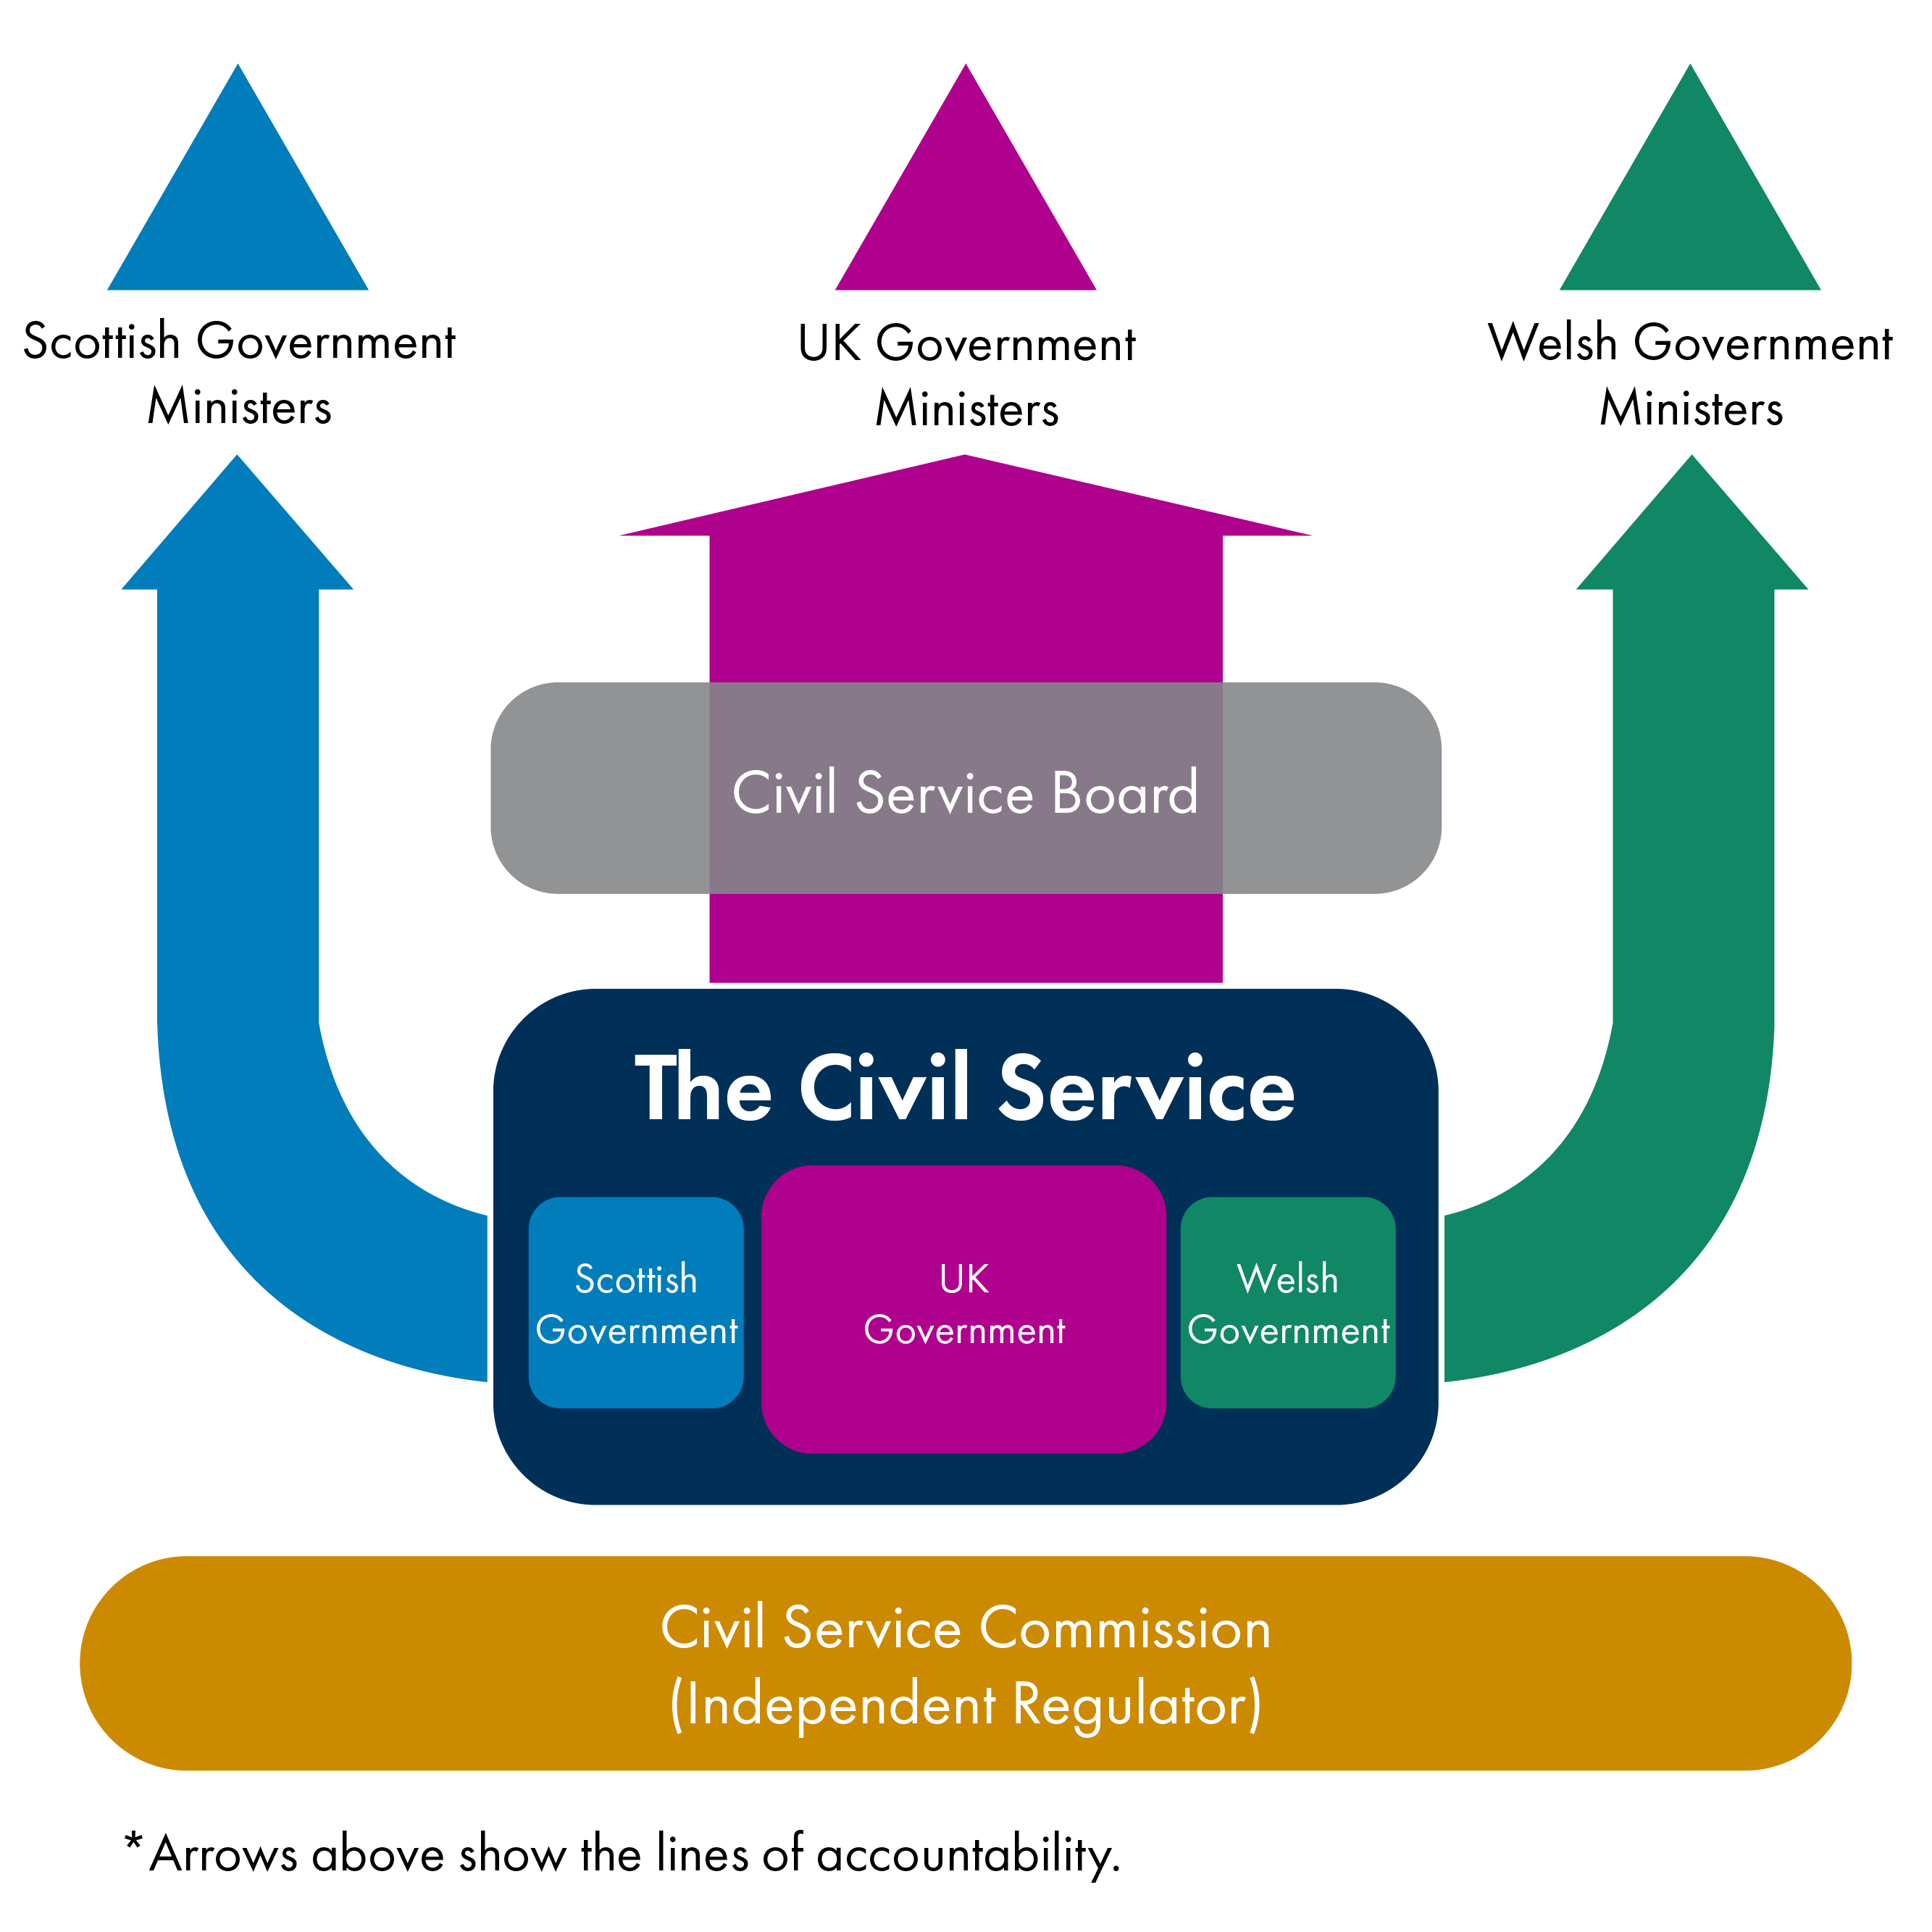 Figure one shows civil servants in a central box with 3 arrows coming off it which show the lines of accountability. One arrow points to the Scottish Government, one to the UK Government and one to the Welsh Government. Above the civil service box and overlaying the arrow to the UK Government is the Civil Service Board whilst underneath the entire figure is the Civil Service Commission (an Independent regulator).